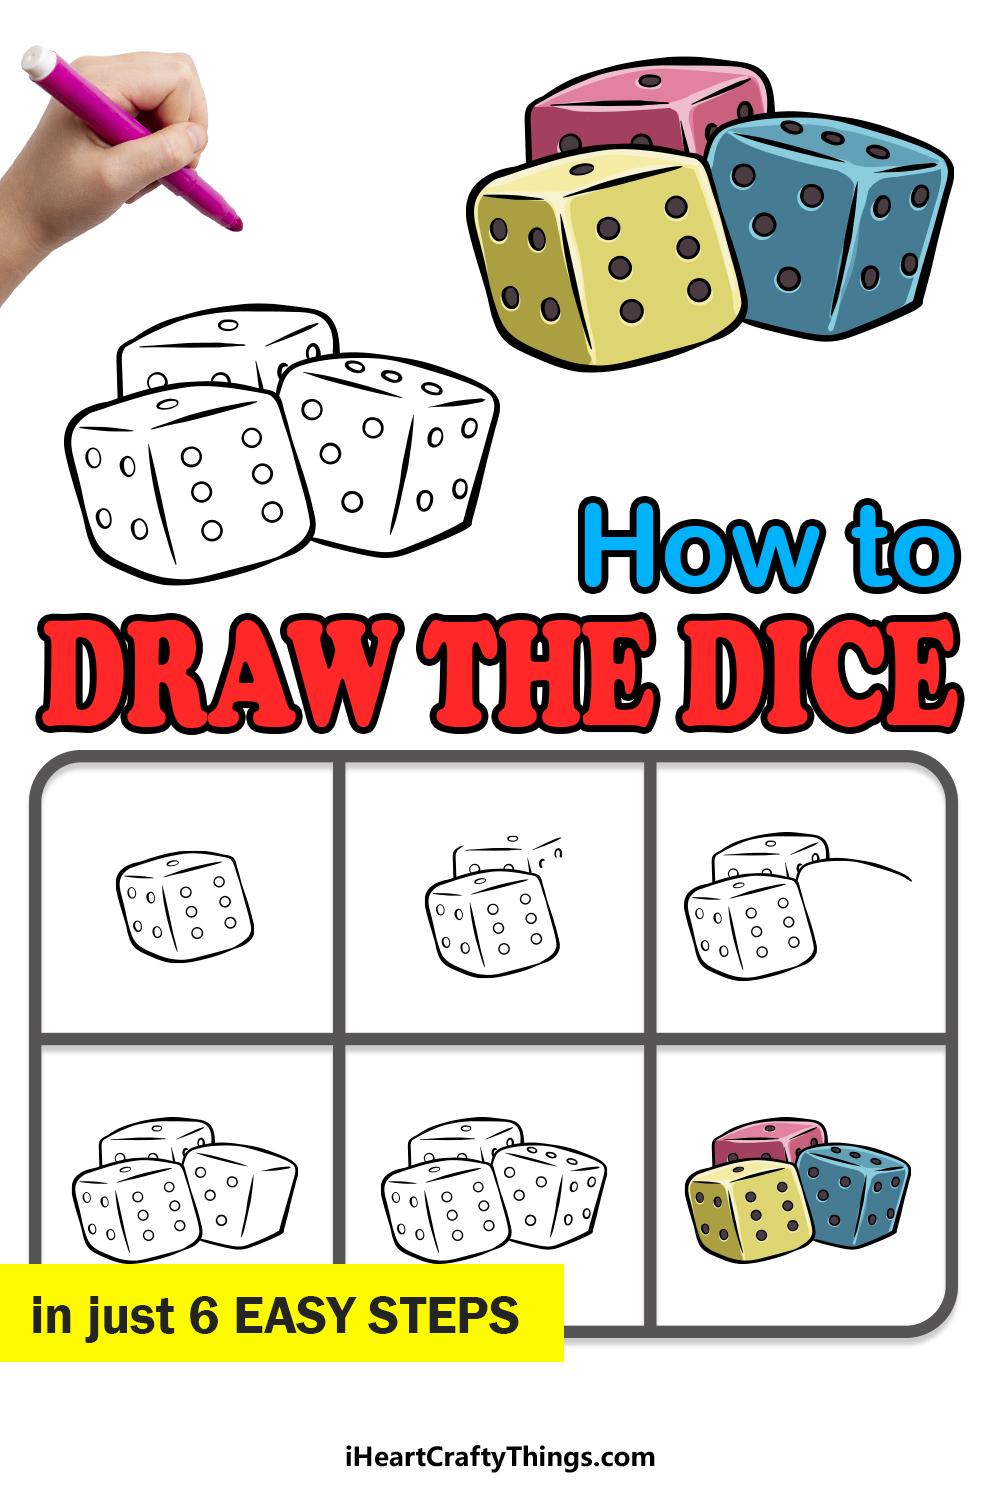 how to draw the dice in 6 easy steps